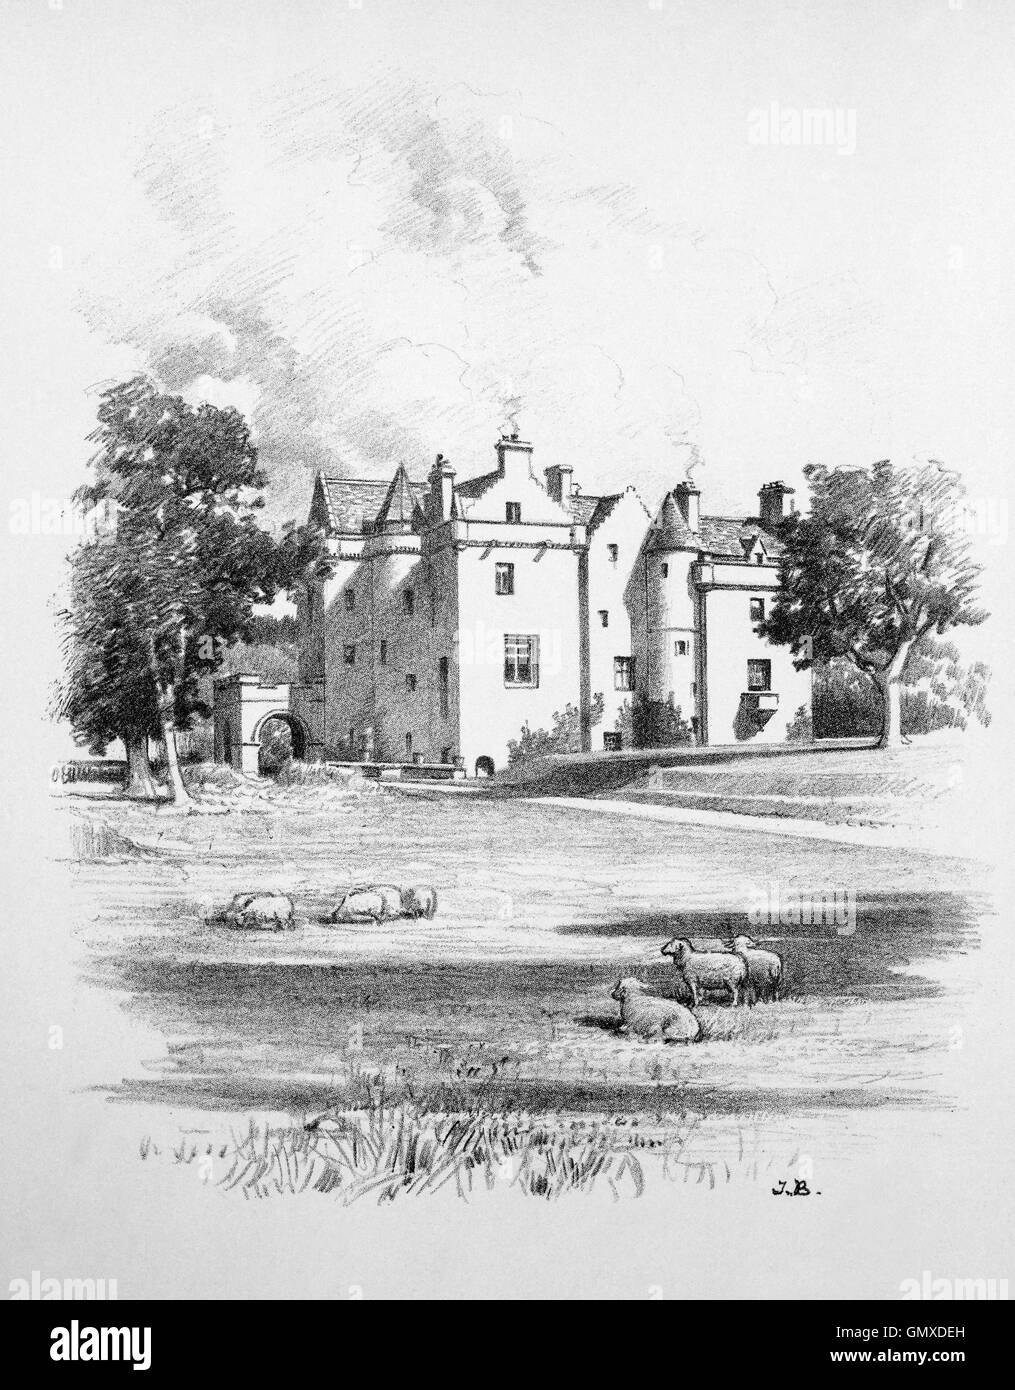 Dunglass House was built by the Pepdies of Dunglass in the 14th century, East Lothian, Scotland (From 'Sketches in East Lothian' by Thomas B. Blacklock...1892) Stock Photo